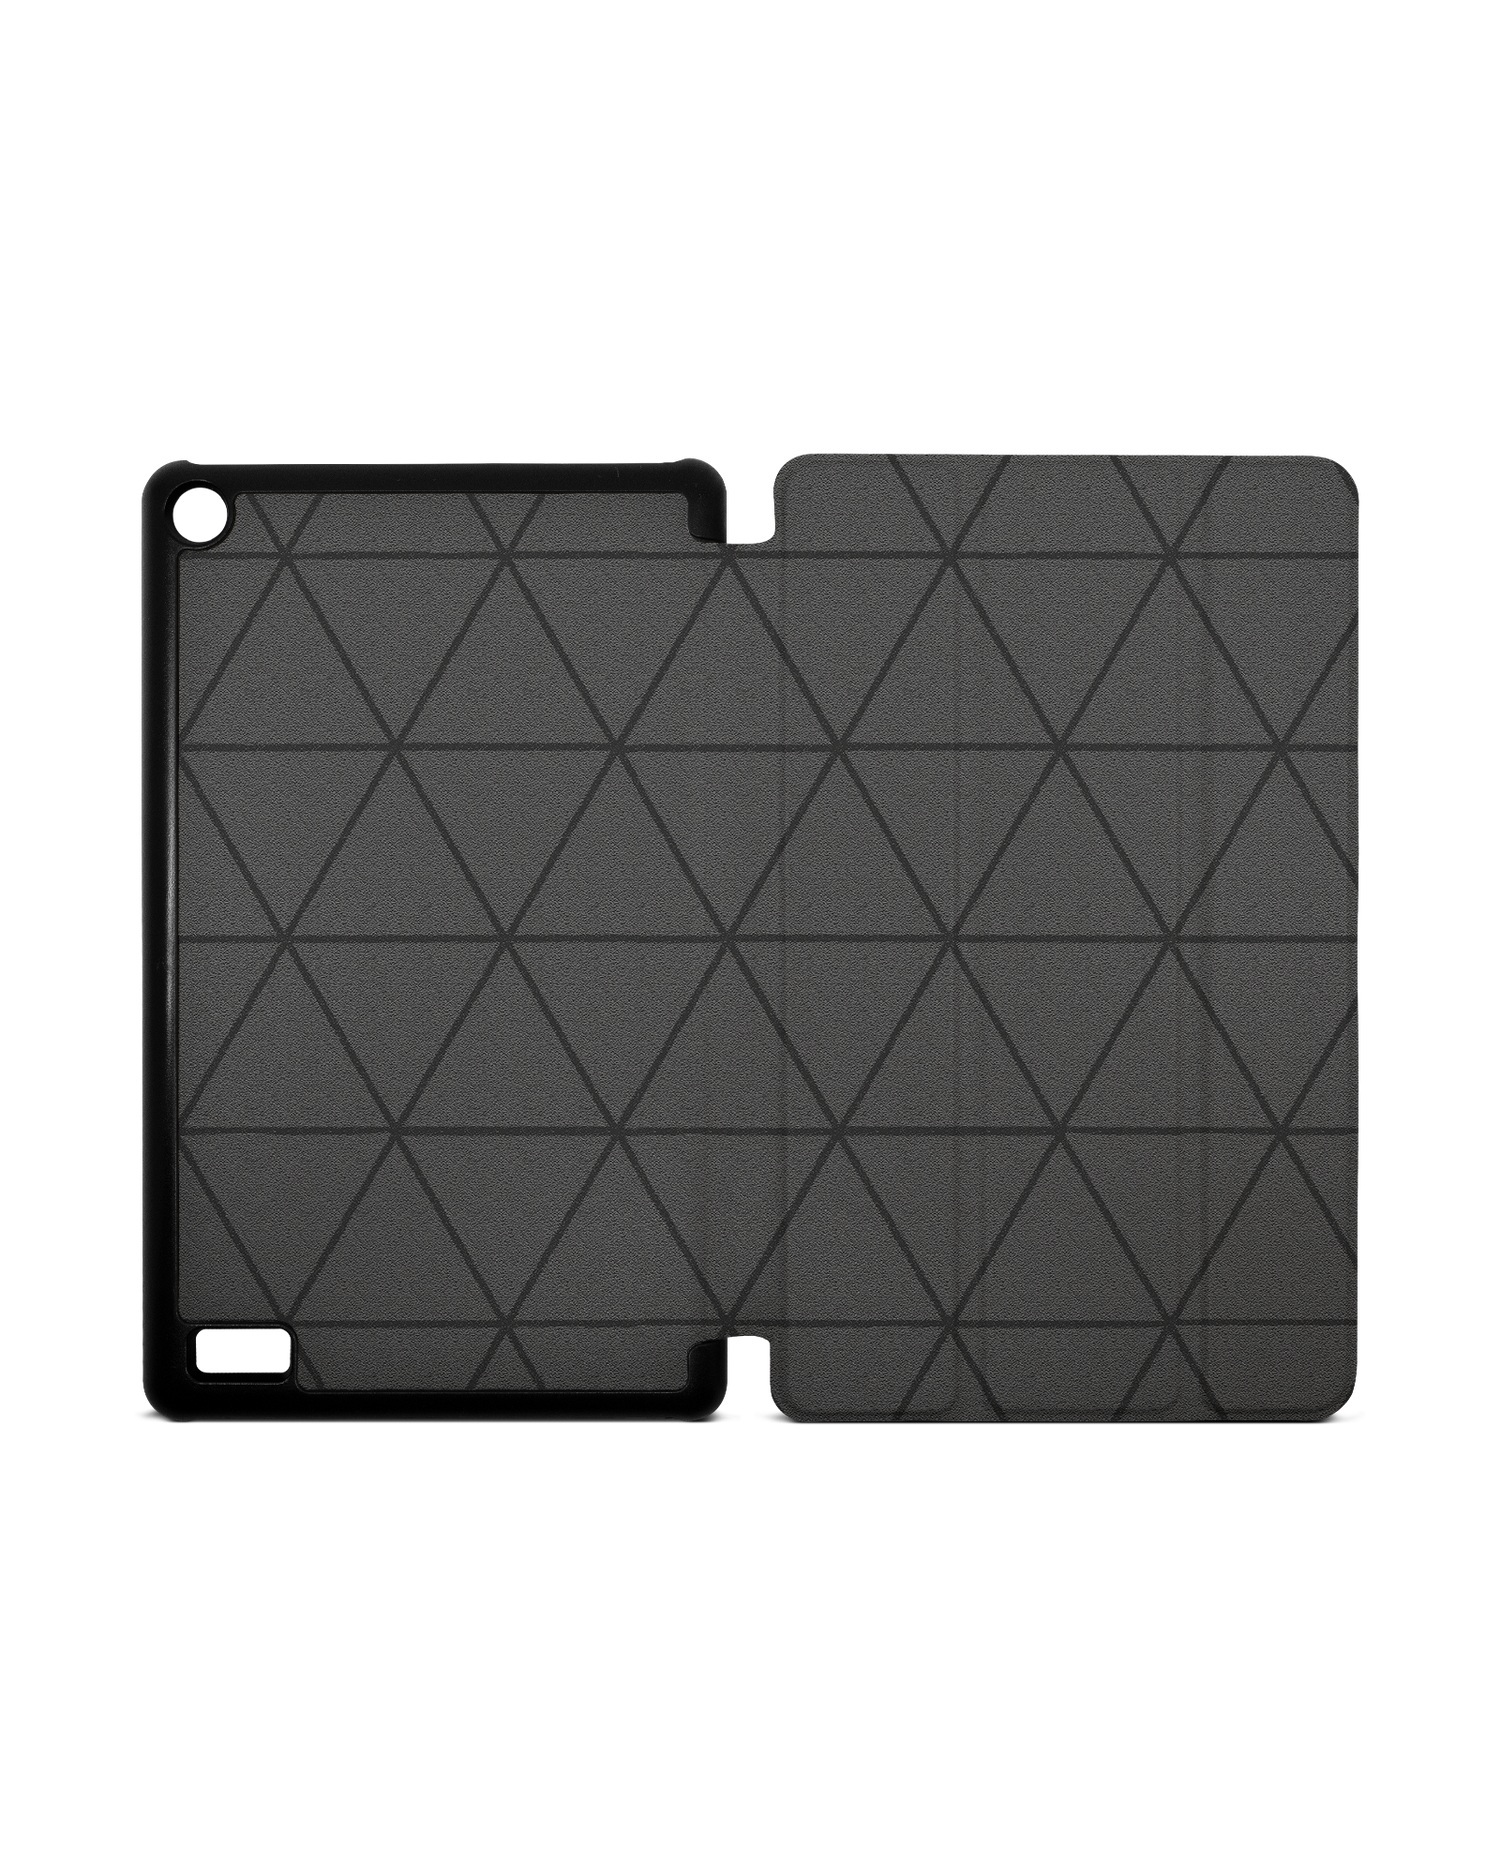 Ash Tablet Smart Case for Amazon Fire 7: Opened